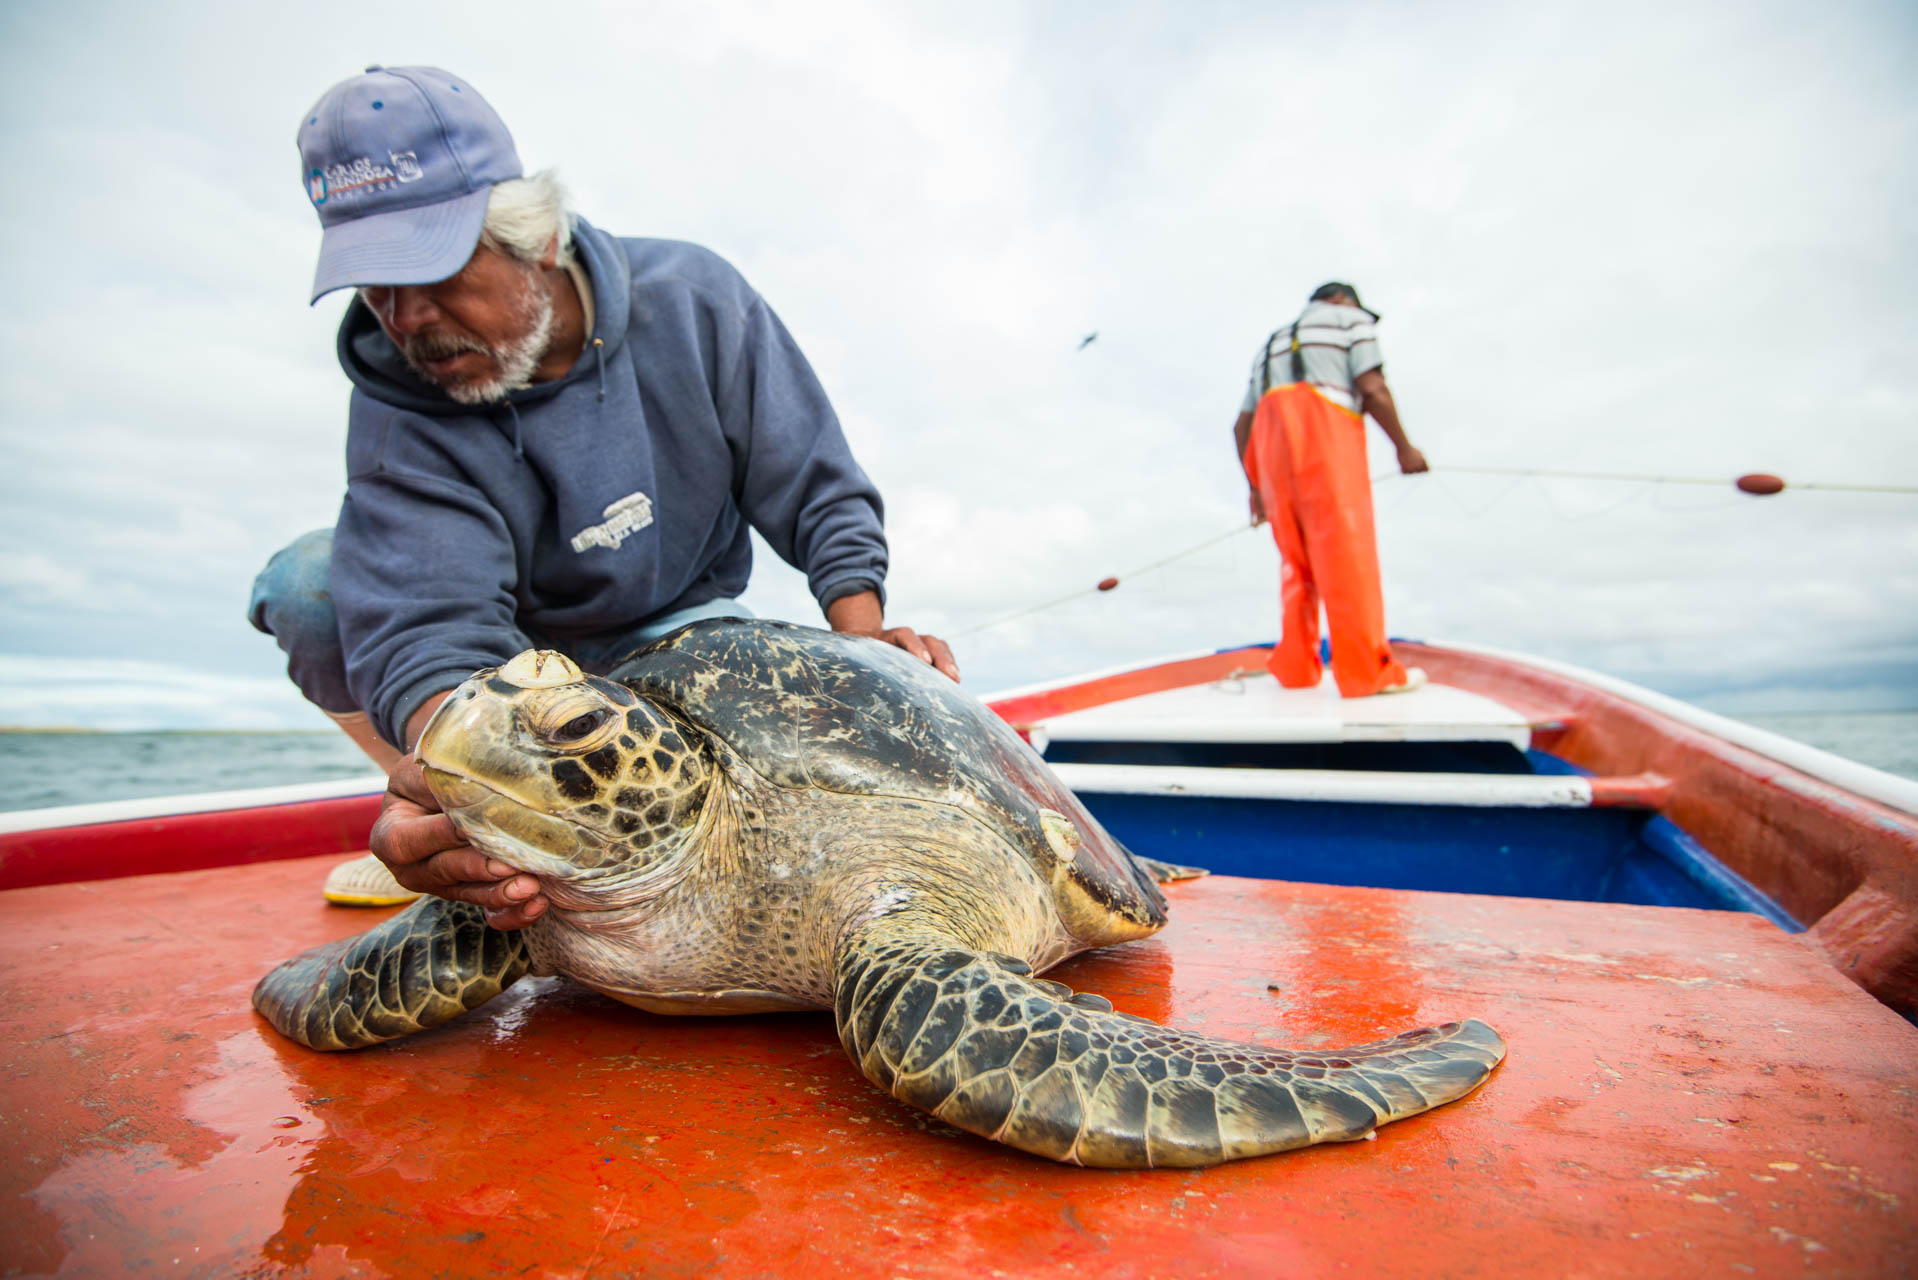 Conservationists care for a Black Sea Turtle during a research and monitoring survey. Baja California Sur, Mexico.